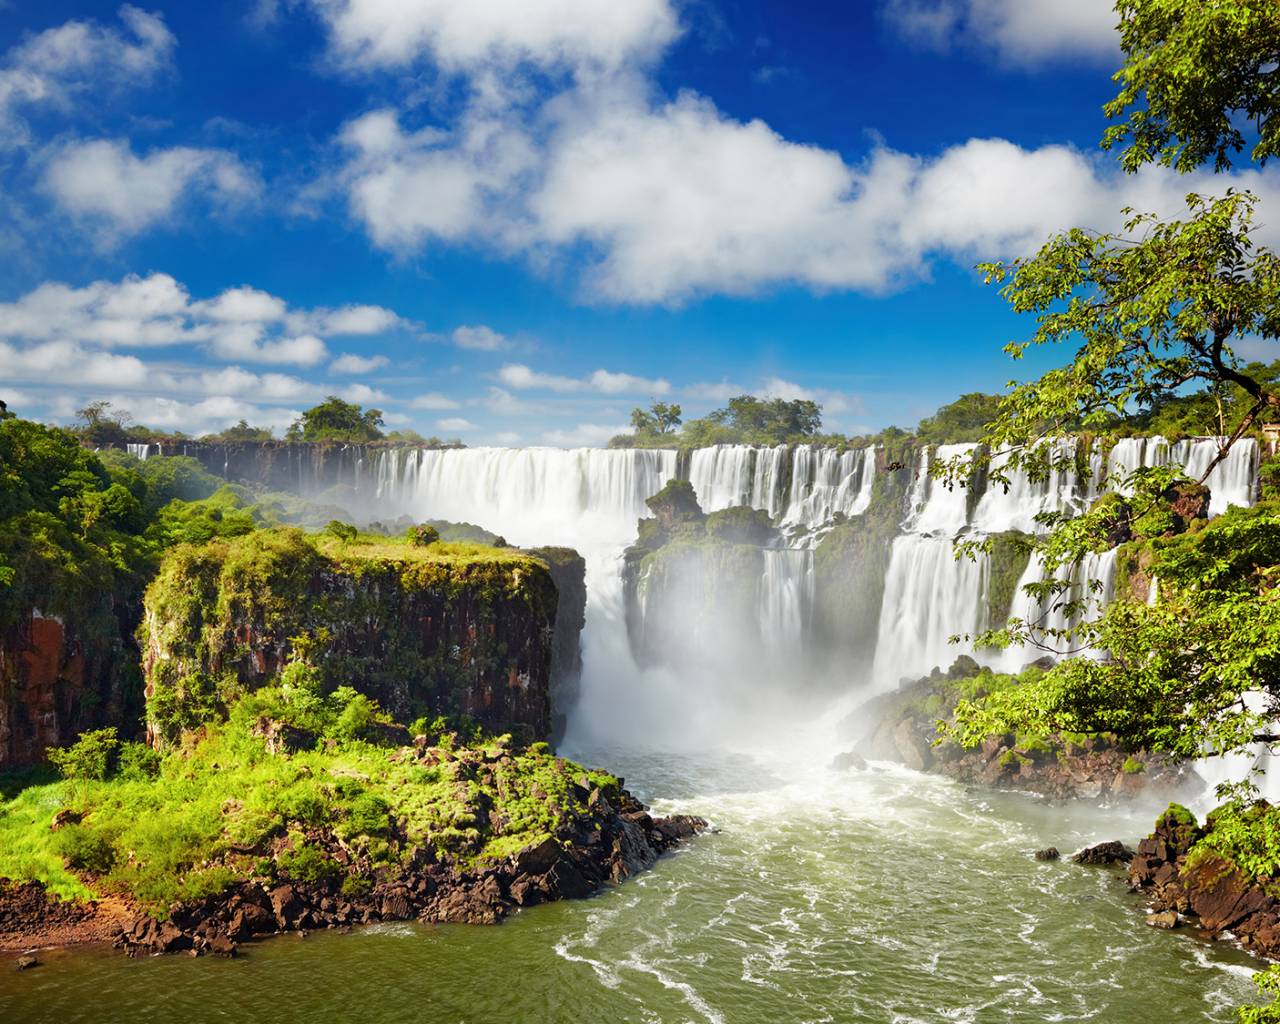 vagt Forventning charter Highlights of South America 21 Day Group Tour | On The Go Tours